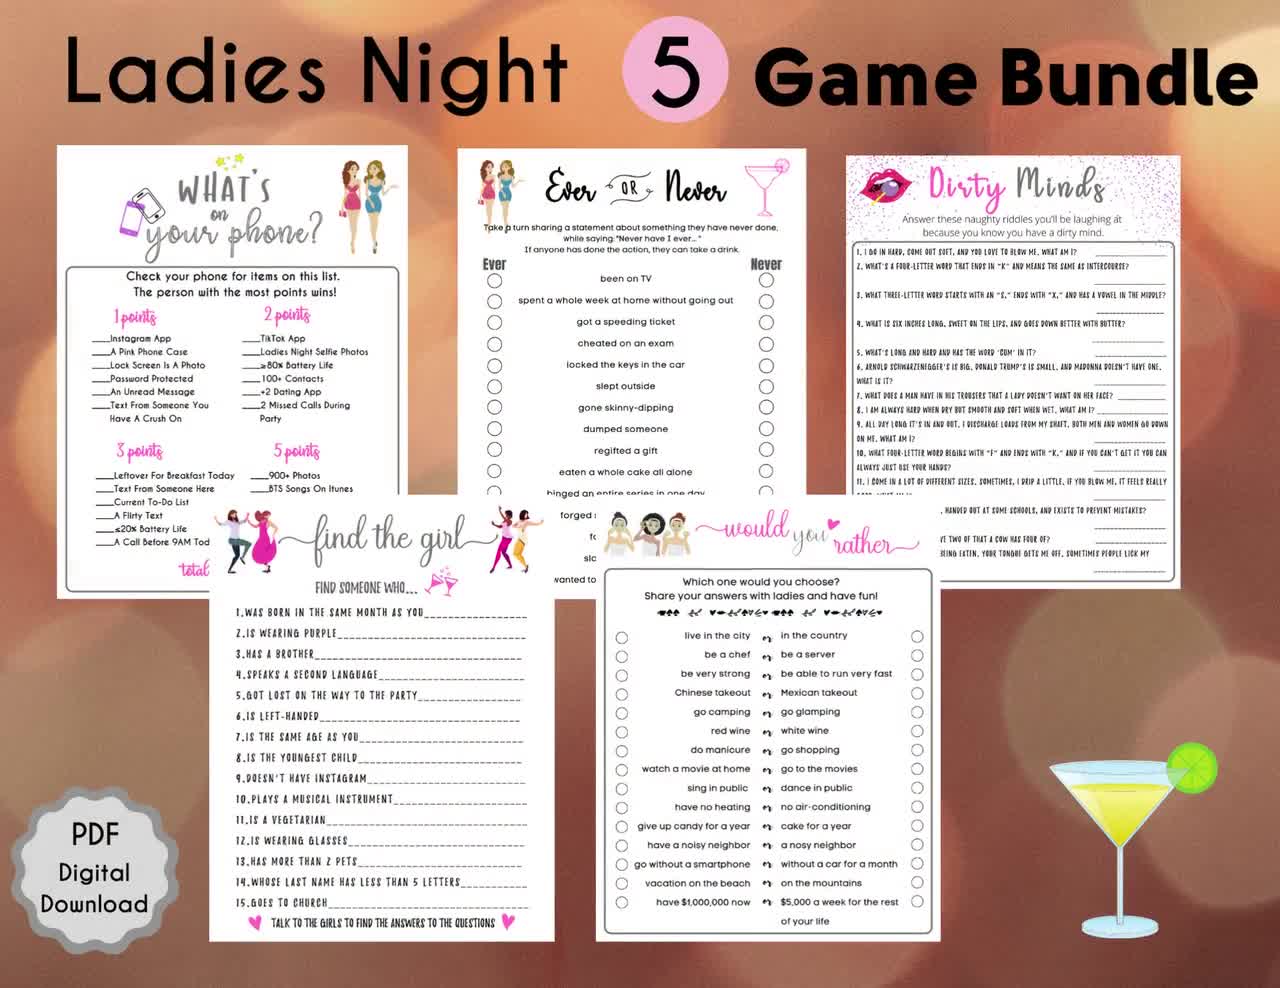 These 10 Drinking Games Are Here To Make Your Game Nights Better